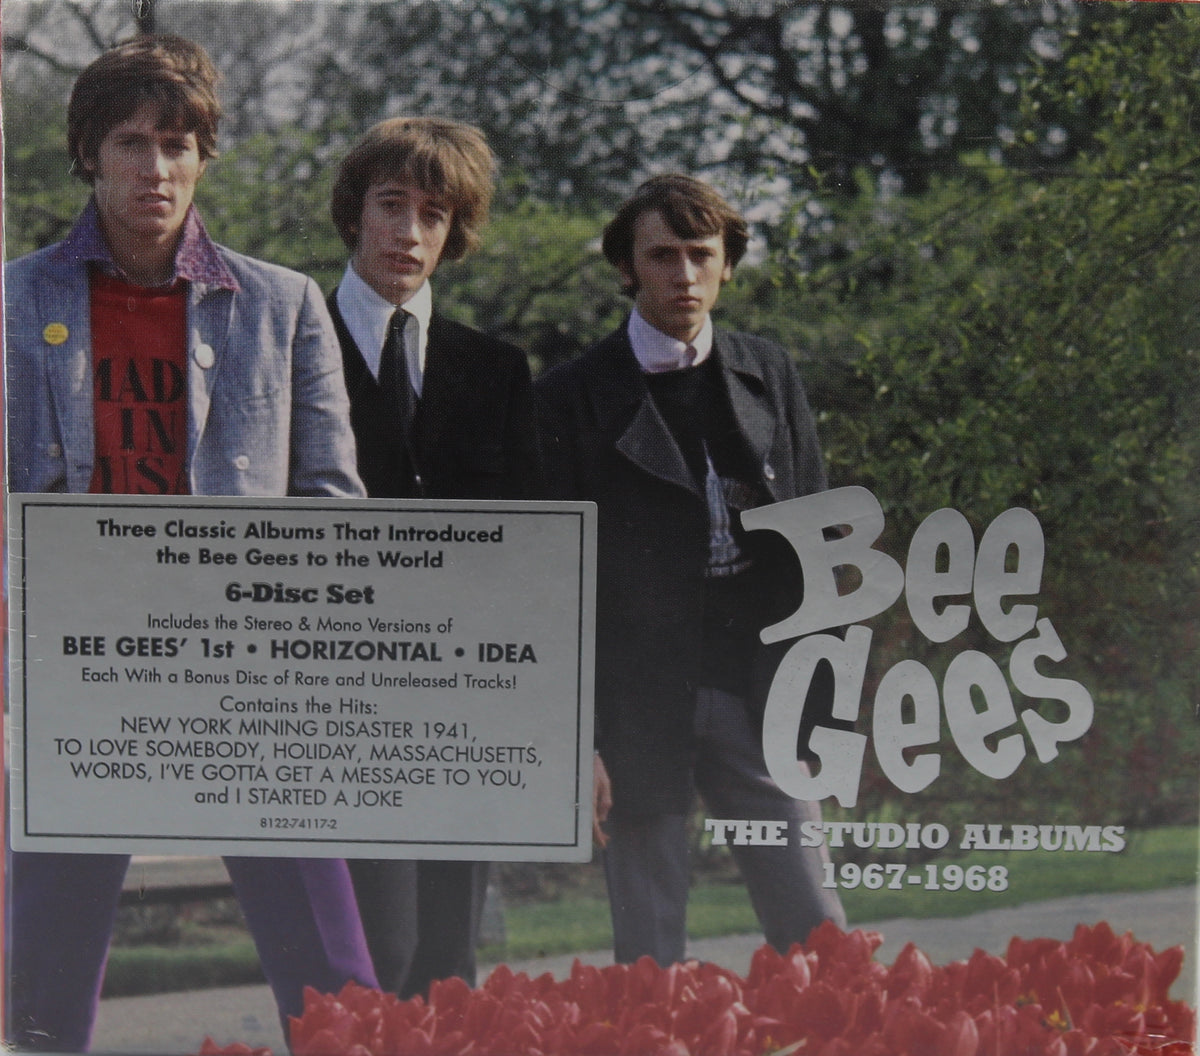 Bee Gees - The Studio Albums 1967 - 1968, 	 6 x CD, Remastered, Box-Set, Compilation, Limited Edition, Europe 2006